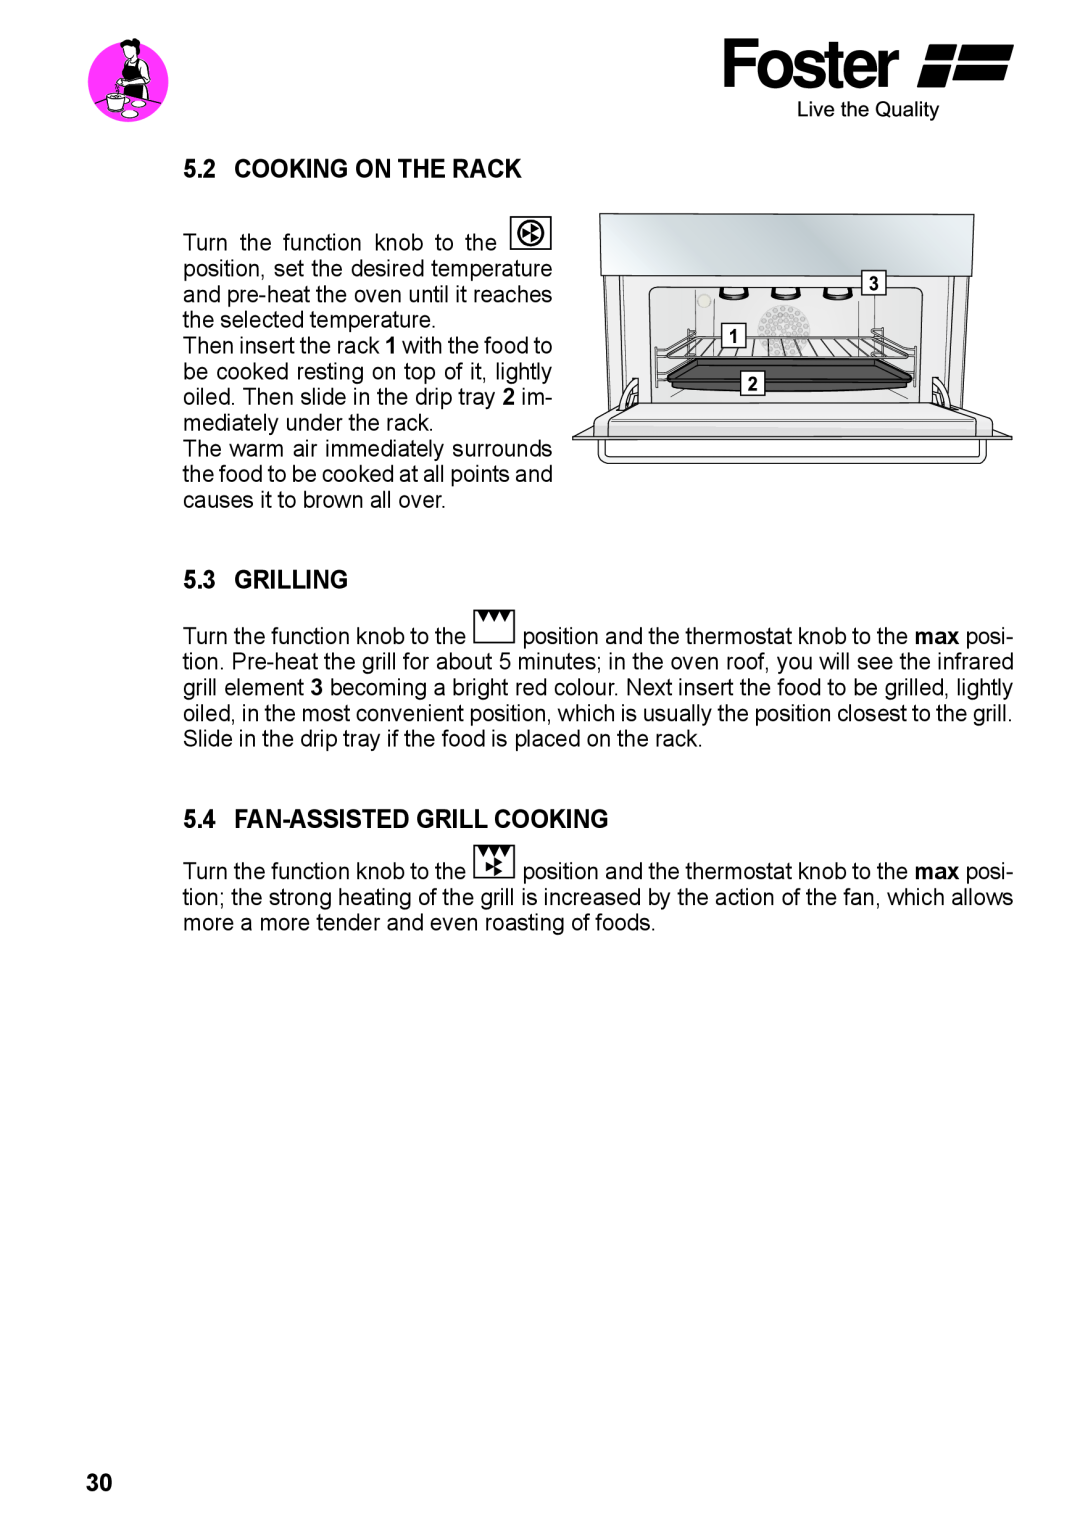 Foster 7170 052, 7172 042 user manual Cooking On The Rack, Grilling, Fan-Assisted Grill Cooking 